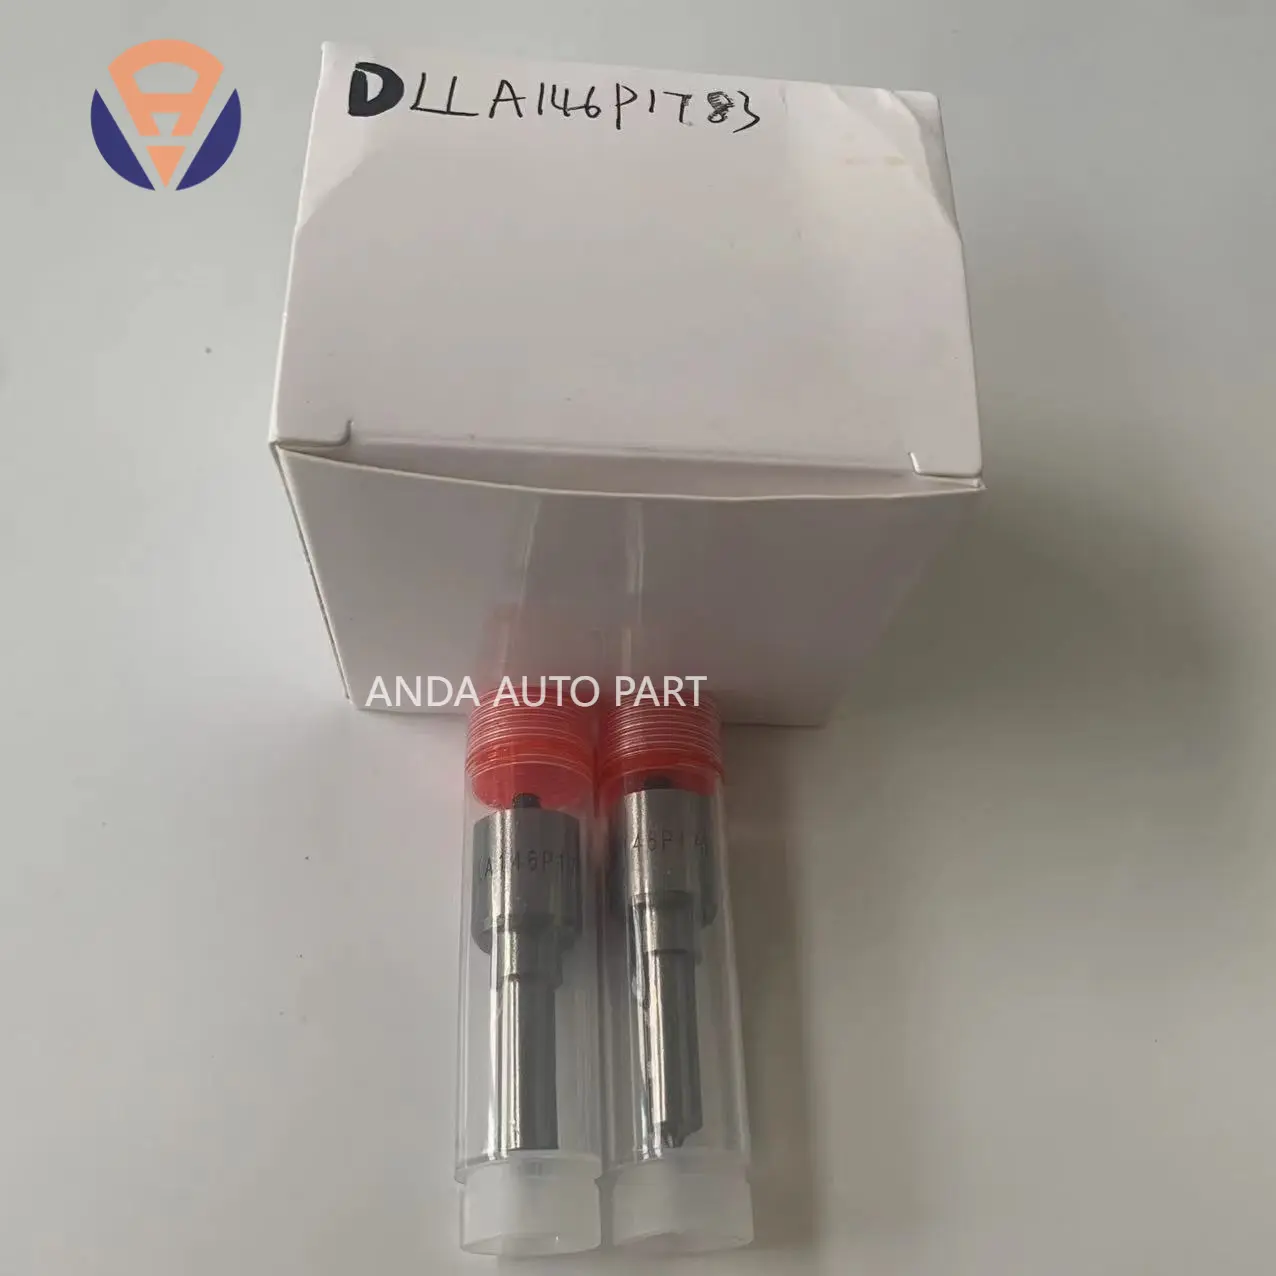 China new DLLA146P1783 Diesel Injector Fuel Nozzle Tip 0433172089 for 0445120101